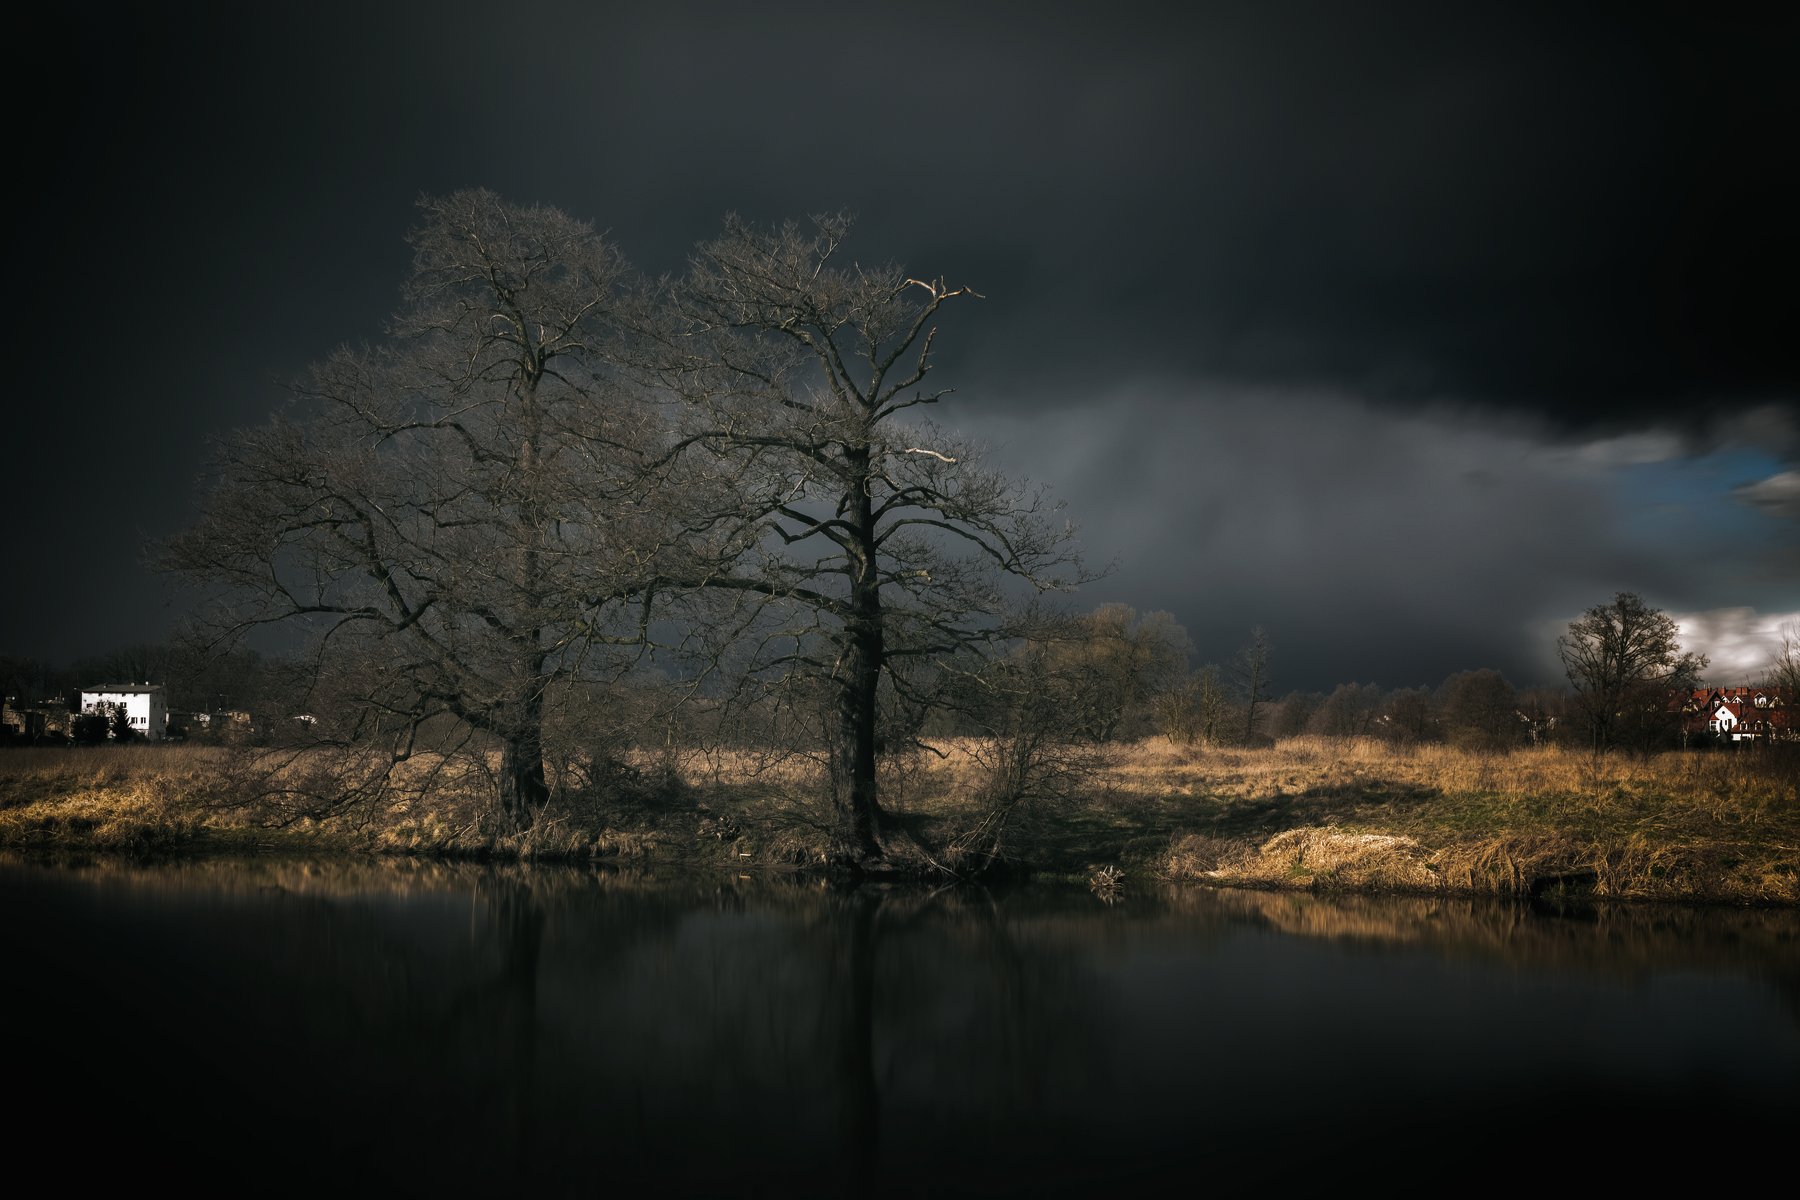 storm is coming,landscape.water,river,trees,nature,light,nikon,mirror,sky,clouds,atmosphere,storm,, Krzysztof Tollas